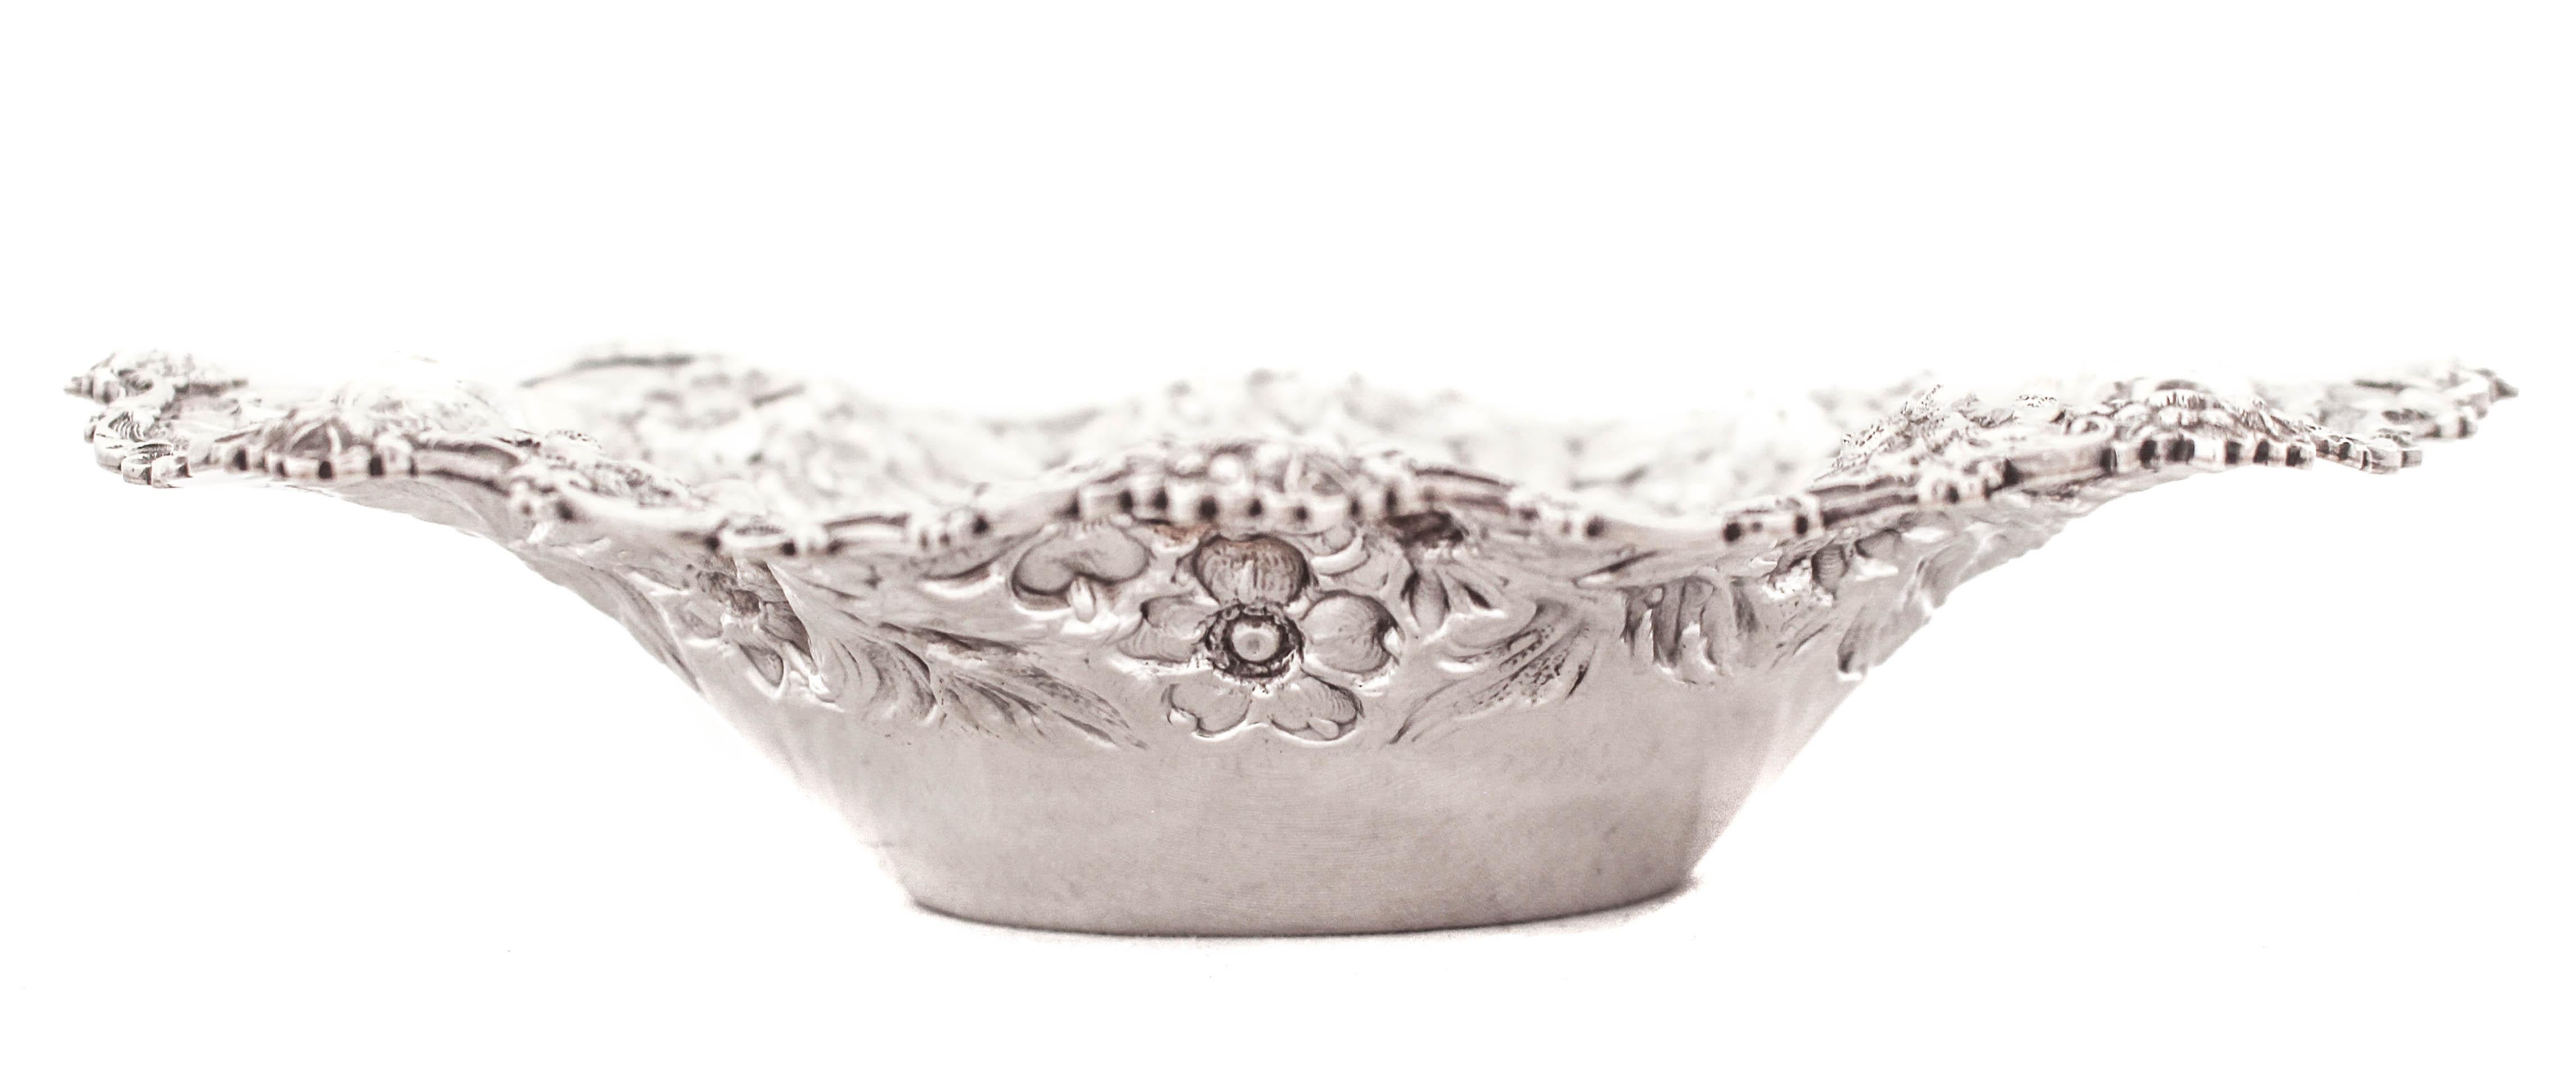 Being offered is a sterling silver bowl by S. Kirk & Sons of Baltimore, Maryland.  Famous for their iconic “Repousse” pattern; a rich and ornate floral motif.  The bowl rim is not only scalloped but fluted too.  All along the edge an assortment of